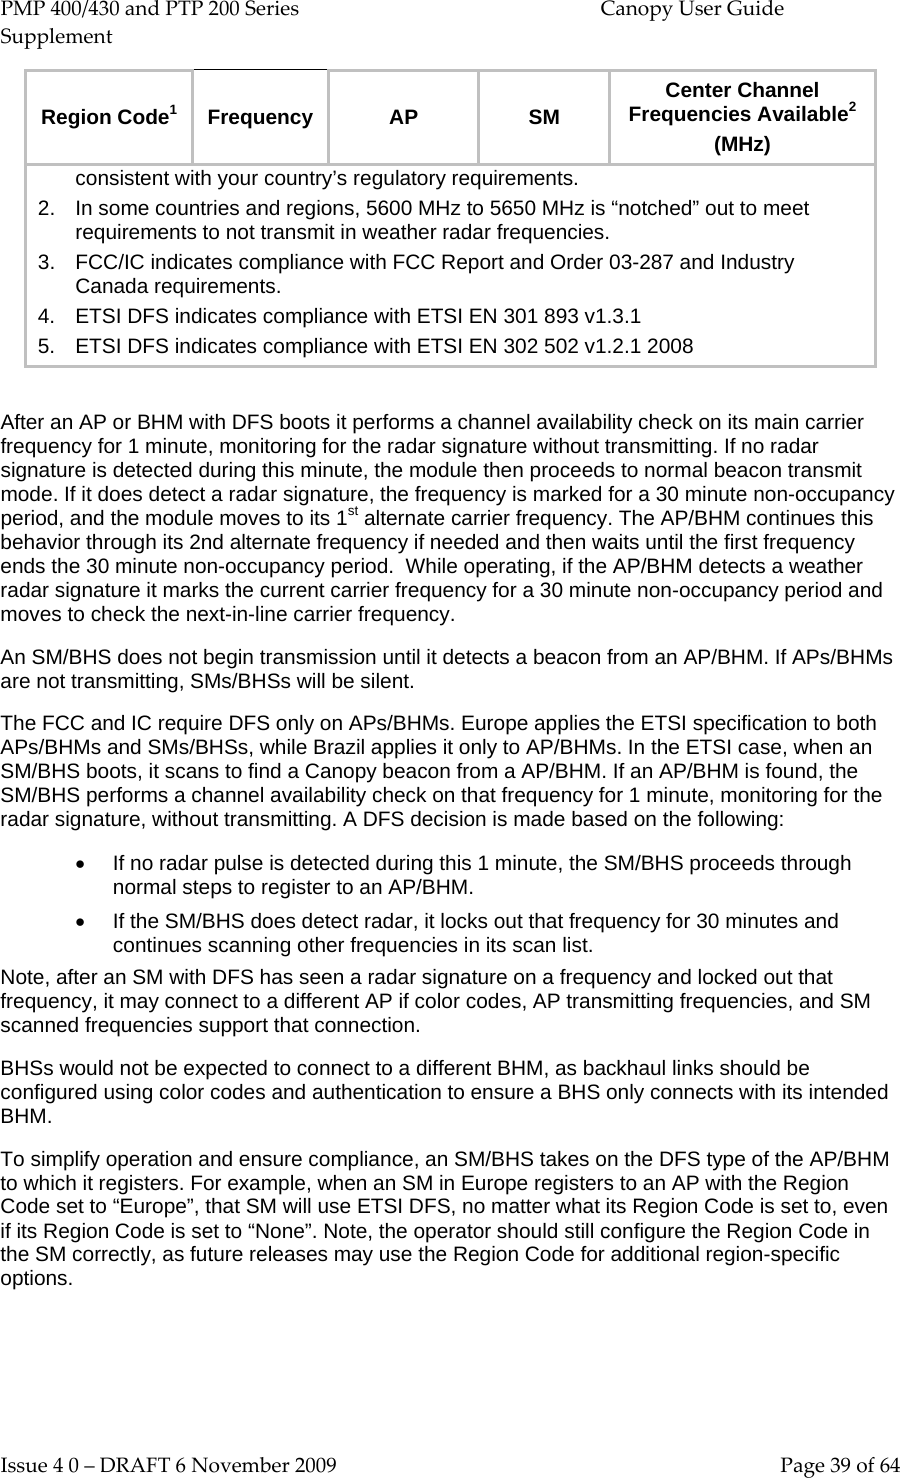 PMP 400/430 and PTP 200 Series  Canopy User Guide Supplement Issue 4 0 – DRAFT 6 November 2009    Page 39 of 64 Region Code1  Frequency  AP SM Center Channel Frequencies Available2 (MHz) consistent with your country’s regulatory requirements. 2. In some countries and regions, 5600 MHz to 5650 MHz is “notched” out to meet requirements to not transmit in weather radar frequencies. 3. FCC/IC indicates compliance with FCC Report and Order 03-287 and Industry Canada requirements. 4. ETSI DFS indicates compliance with ETSI EN 301 893 v1.3.1 5. ETSI DFS indicates compliance with ETSI EN 302 502 v1.2.1 2008  After an AP or BHM with DFS boots it performs a channel availability check on its main carrier frequency for 1 minute, monitoring for the radar signature without transmitting. If no radar signature is detected during this minute, the module then proceeds to normal beacon transmit mode. If it does detect a radar signature, the frequency is marked for a 30 minute non-occupancy period, and the module moves to its 1st alternate carrier frequency. The AP/BHM continues this behavior through its 2nd alternate frequency if needed and then waits until the first frequency ends the 30 minute non-occupancy period.  While operating, if the AP/BHM detects a weather radar signature it marks the current carrier frequency for a 30 minute non-occupancy period and moves to check the next-in-line carrier frequency. An SM/BHS does not begin transmission until it detects a beacon from an AP/BHM. If APs/BHMs are not transmitting, SMs/BHSs will be silent. The FCC and IC require DFS only on APs/BHMs. Europe applies the ETSI specification to both APs/BHMs and SMs/BHSs, while Brazil applies it only to AP/BHMs. In the ETSI case, when an SM/BHS boots, it scans to find a Canopy beacon from a AP/BHM. If an AP/BHM is found, the SM/BHS performs a channel availability check on that frequency for 1 minute, monitoring for the radar signature, without transmitting. A DFS decision is made based on the following: • If no radar pulse is detected during this 1 minute, the SM/BHS proceeds through normal steps to register to an AP/BHM. • If the SM/BHS does detect radar, it locks out that frequency for 30 minutes and continues scanning other frequencies in its scan list. Note, after an SM with DFS has seen a radar signature on a frequency and locked out that frequency, it may connect to a different AP if color codes, AP transmitting frequencies, and SM scanned frequencies support that connection. BHSs would not be expected to connect to a different BHM, as backhaul links should be configured using color codes and authentication to ensure a BHS only connects with its intended BHM. To simplify operation and ensure compliance, an SM/BHS takes on the DFS type of the AP/BHM to which it registers. For example, when an SM in Europe registers to an AP with the Region Code set to “Europe”, that SM will use ETSI DFS, no matter what its Region Code is set to, even if its Region Code is set to “None”. Note, the operator should still configure the Region Code in the SM correctly, as future releases may use the Region Code for additional region-specific options.  